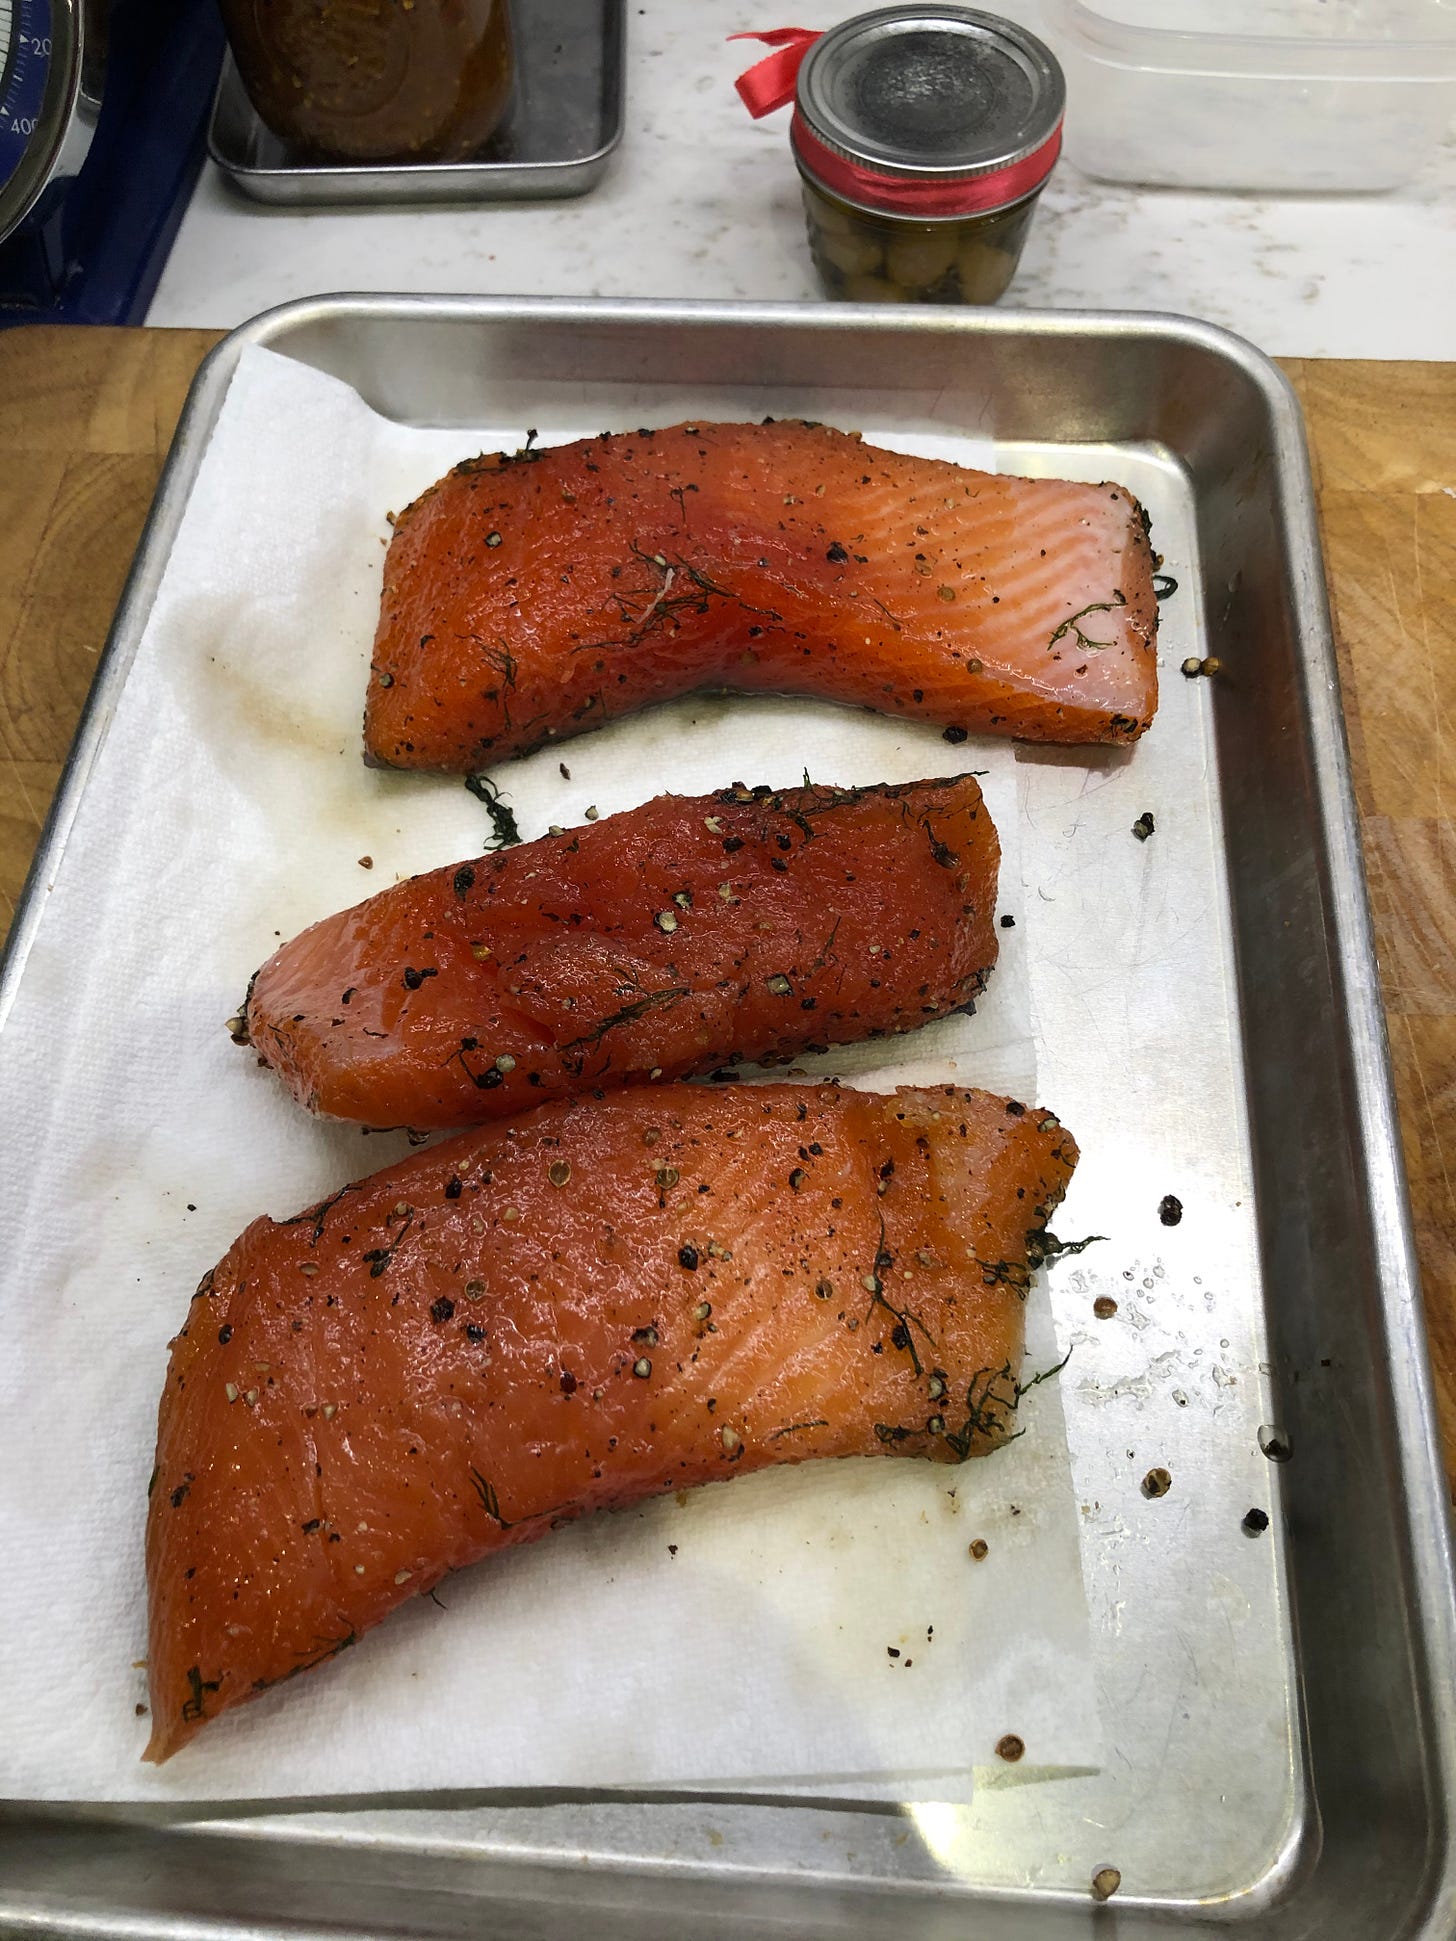 The gravlax, removed from the package and brushed fairly clean.